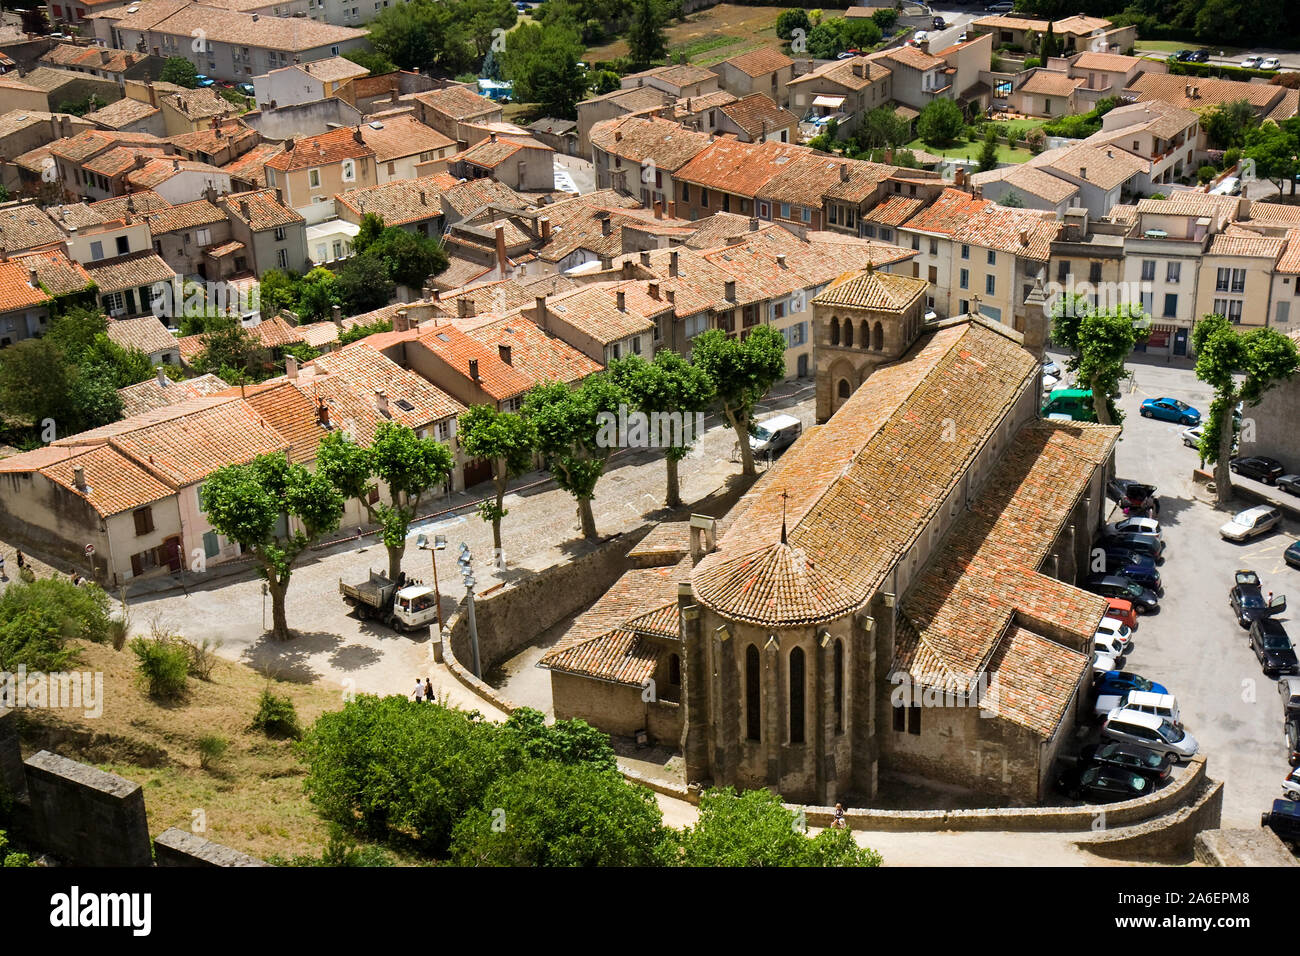 View of the Church of Eglise Saint-Gimer and surrounding part of the old town of Carcassonne taken from the city wall Stock Photo